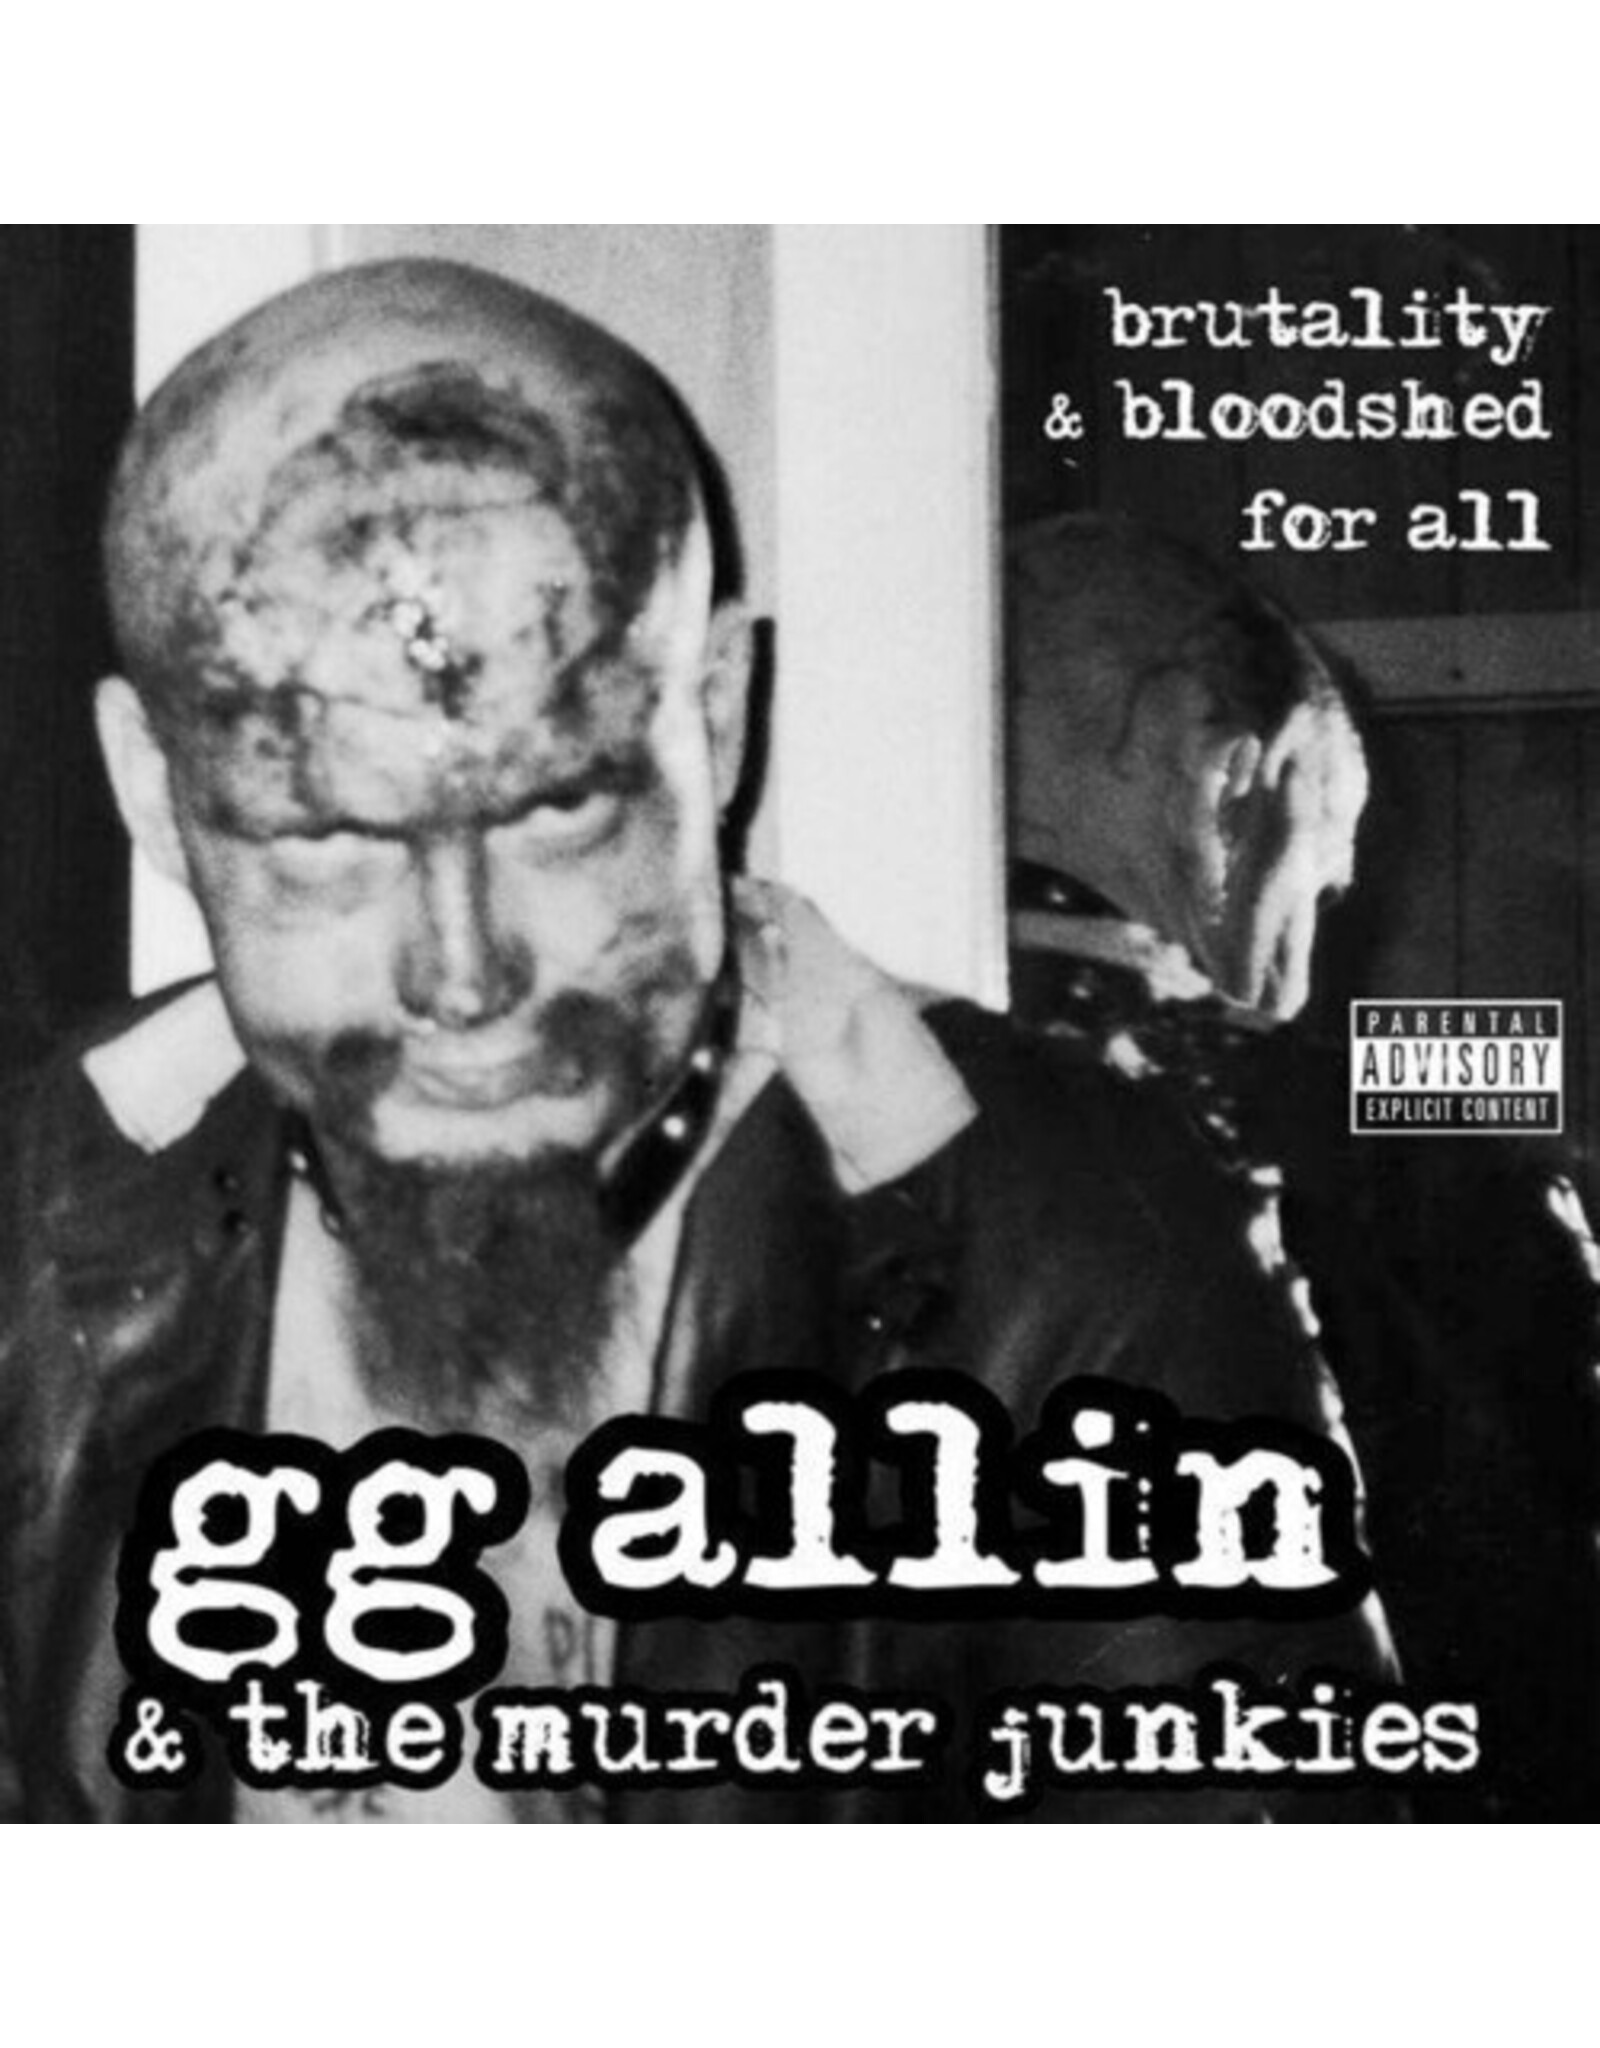 Allin, GG and the Murder Junkies - Brutality and Bloodshed for All (Clear Orange Vinyl) LP